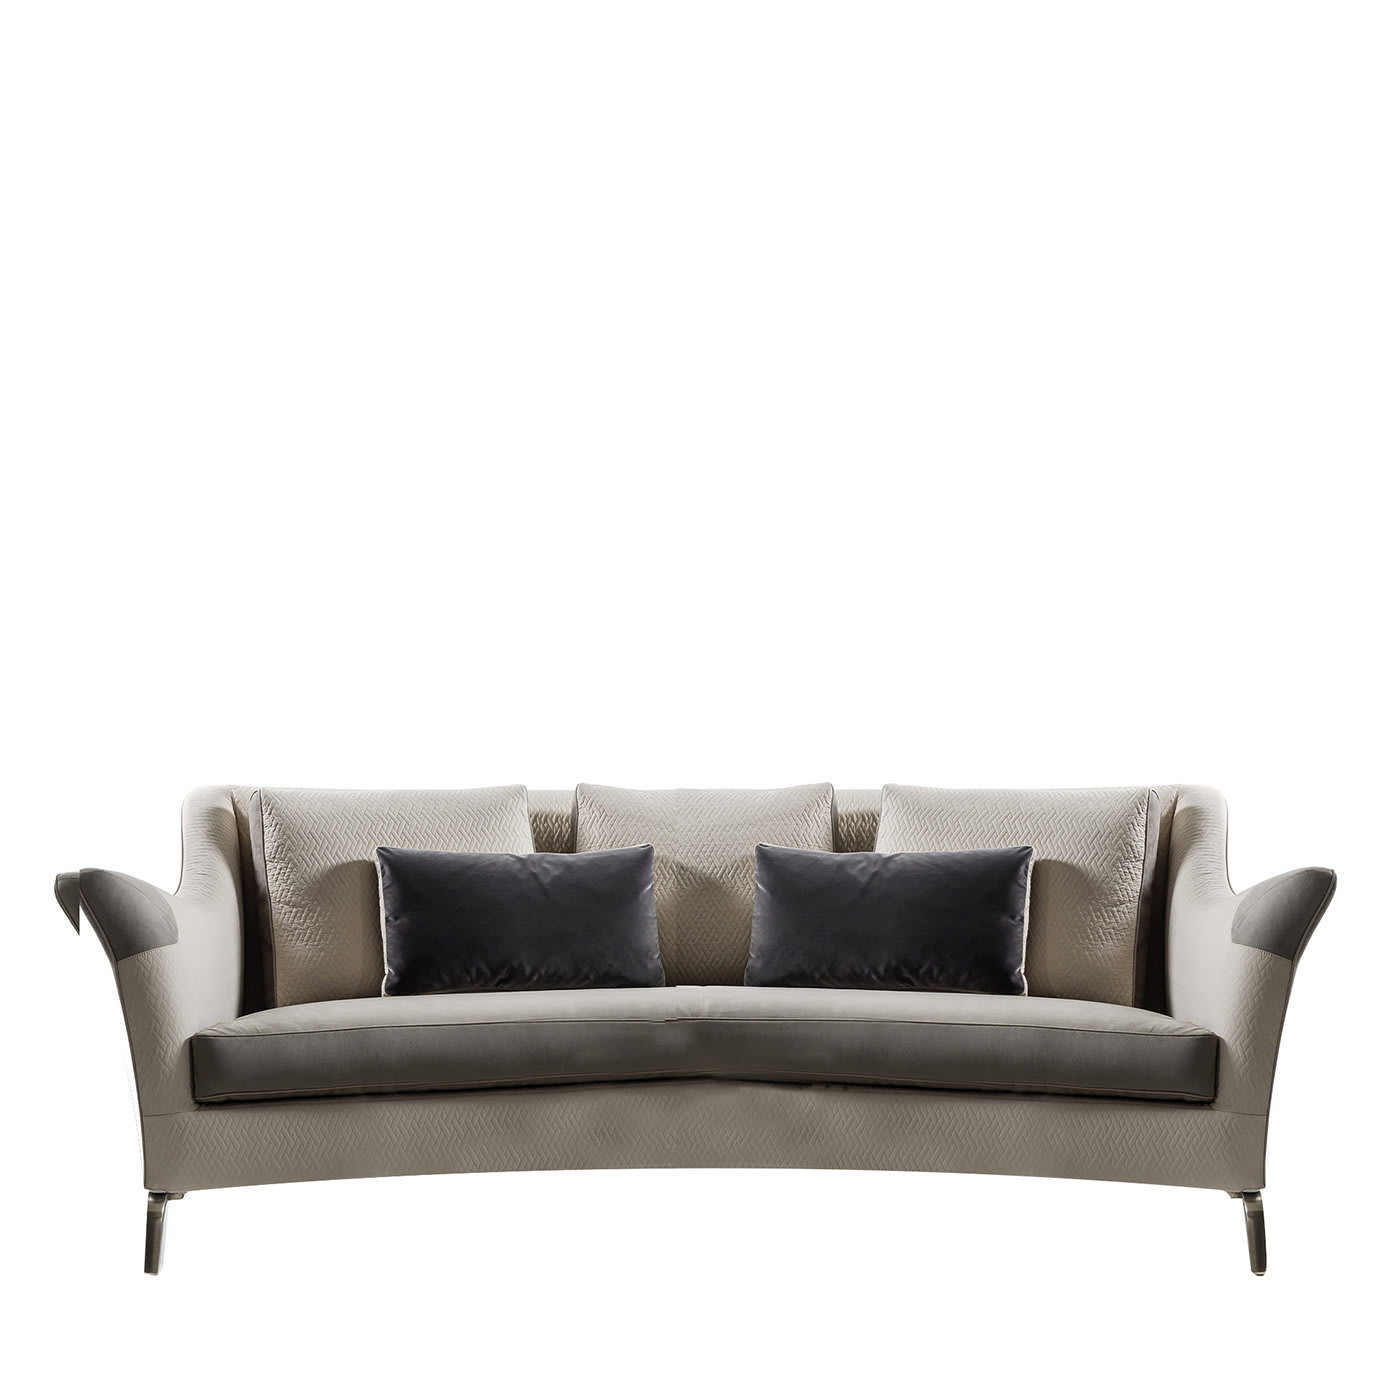 Patterned Beige and Taupe Sofa - Palmobili